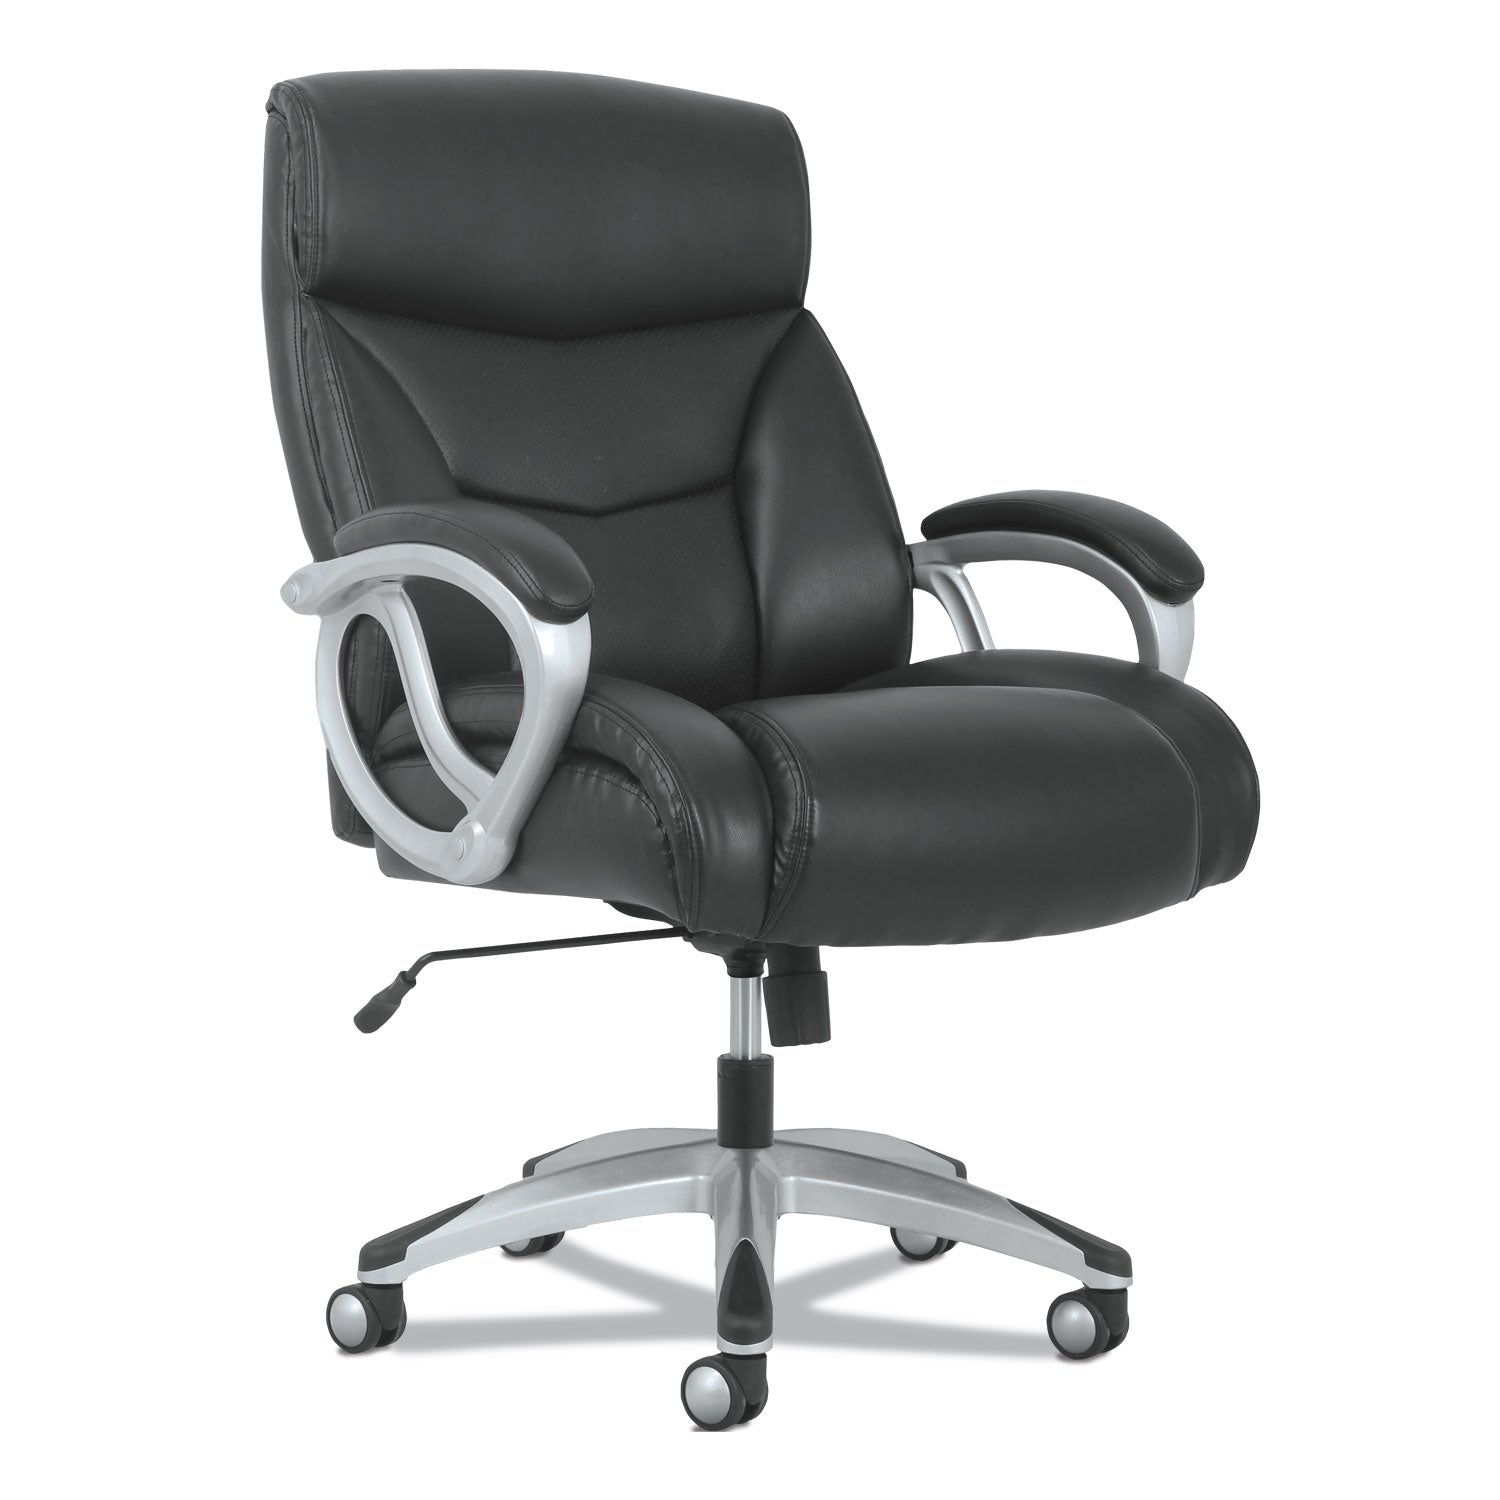 3-forty-one-big-and-tall-chair-supports-up-to-400-lb-19-to-22-seat-height-black-seat-back-chrome-base_bsxvst341 - 1